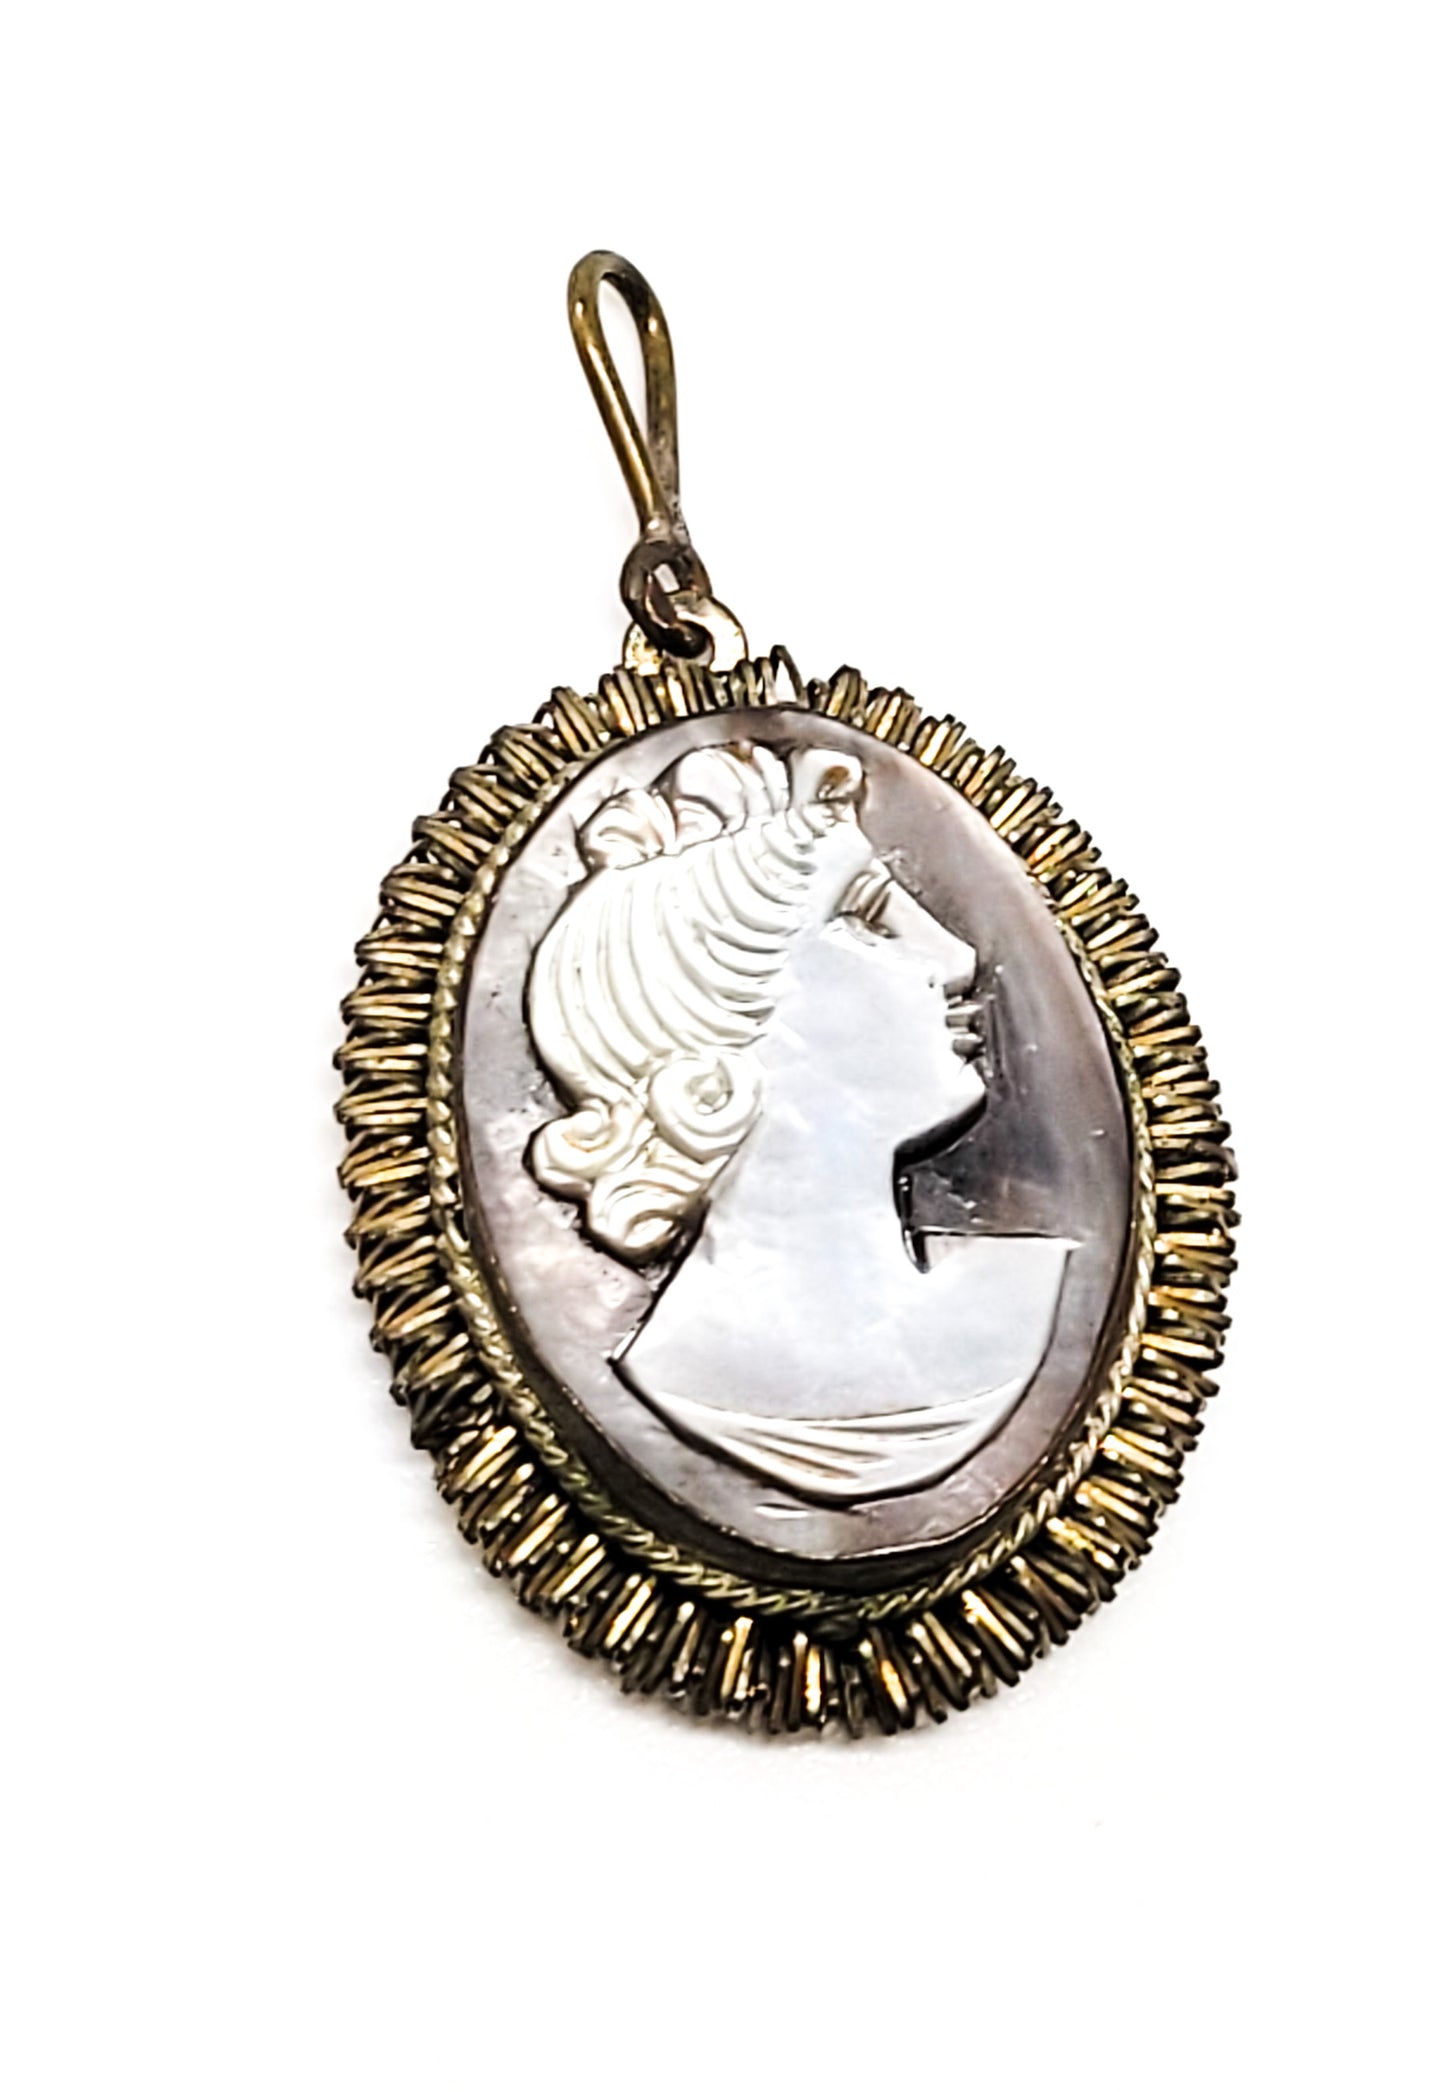 Vincenzo Accardo BCA carved Abalone Mother of Pearl shell cameo vintage pendant